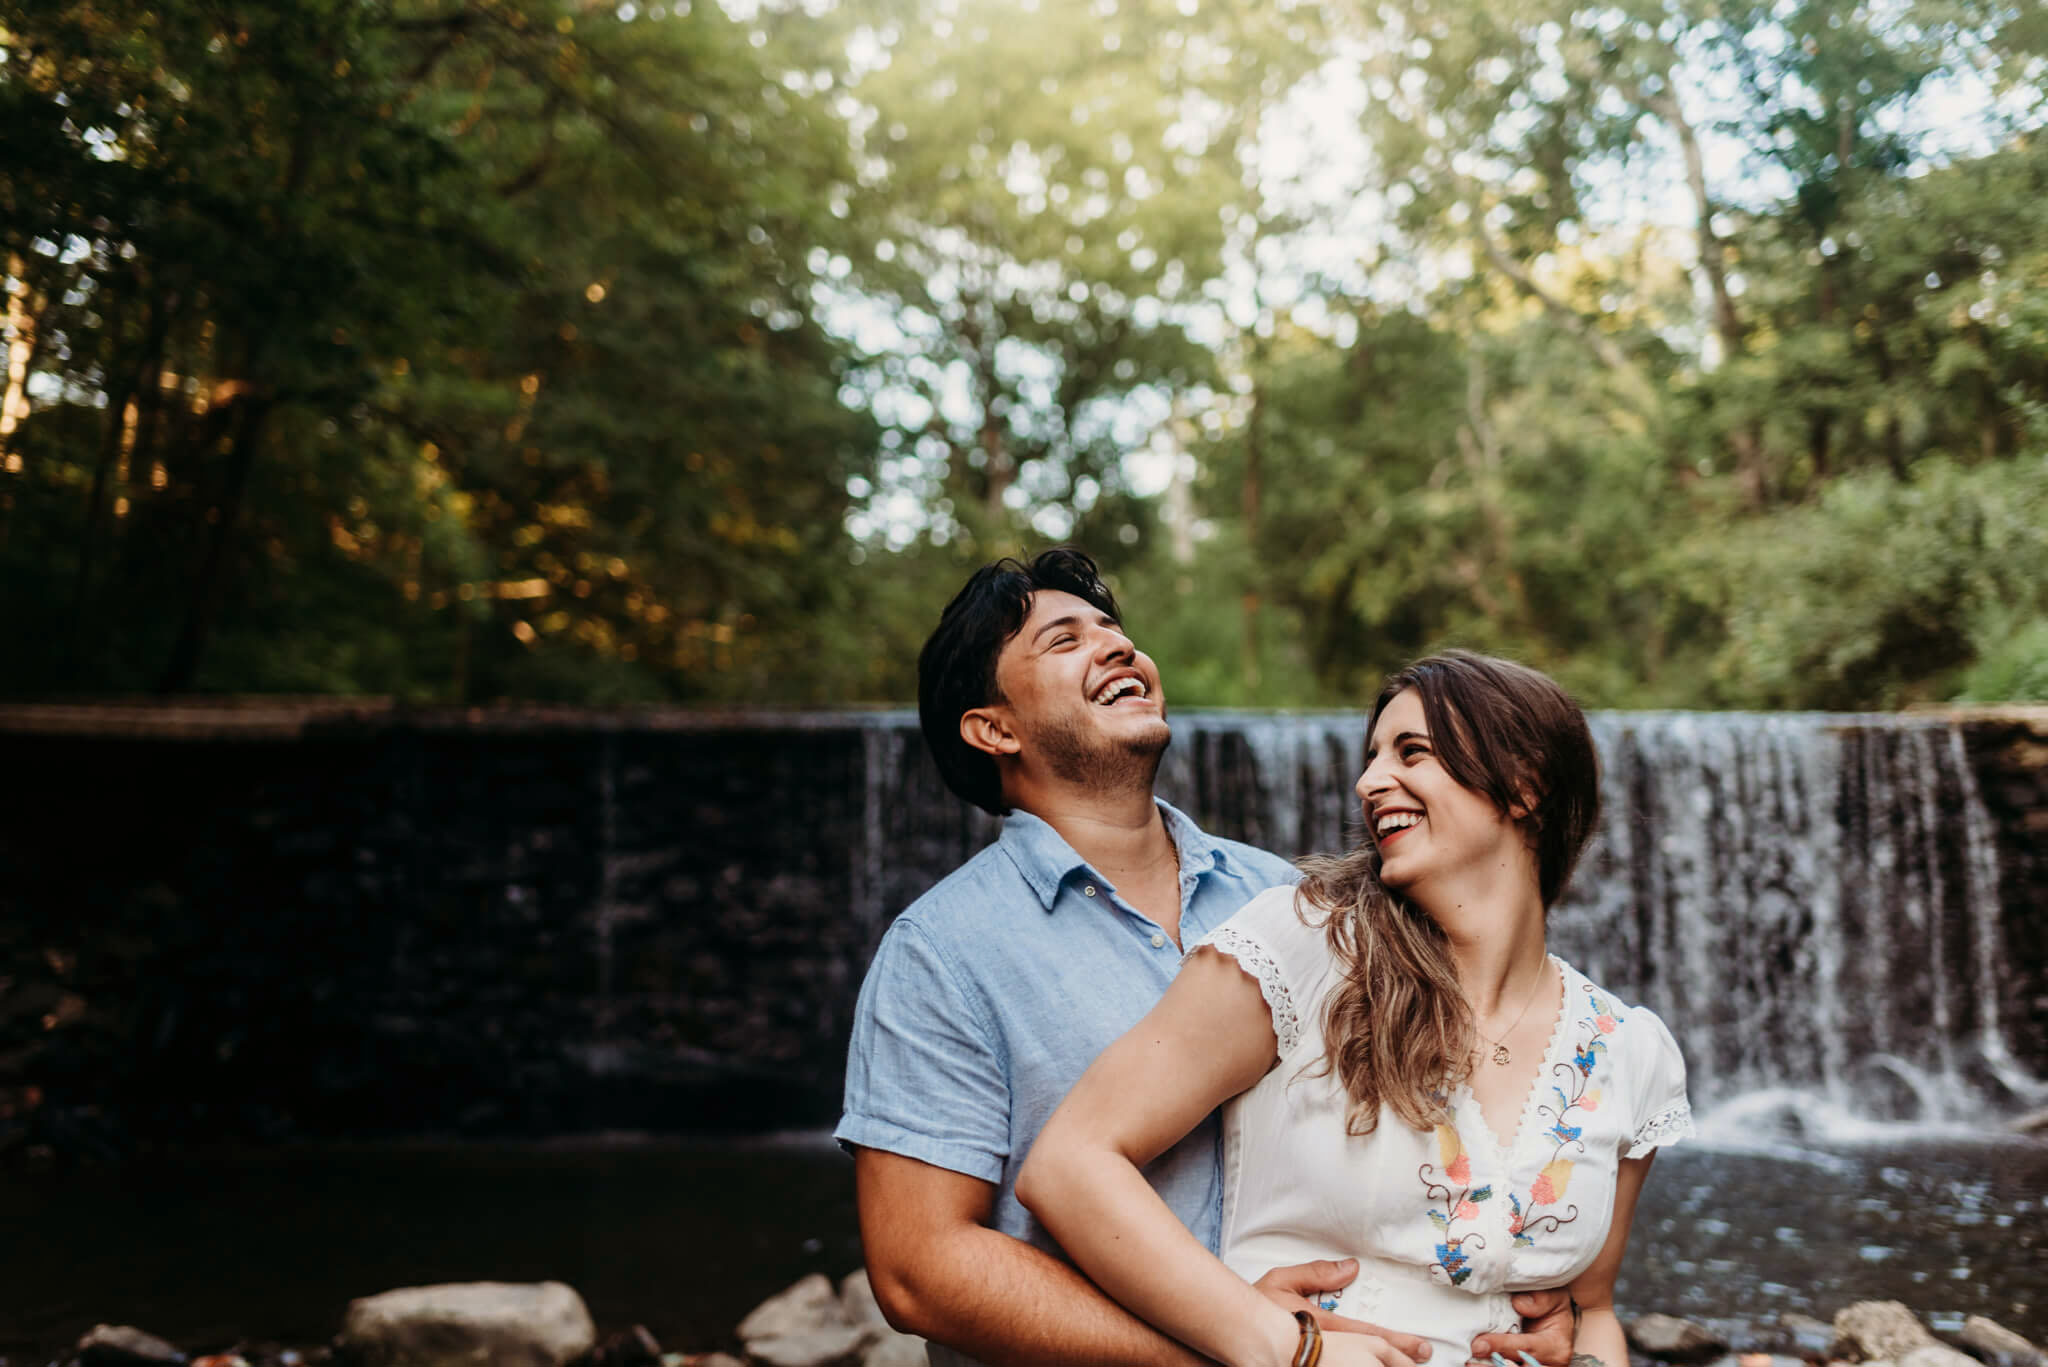 Couple laughing in photo featured in post about Philadelphia date night ideas